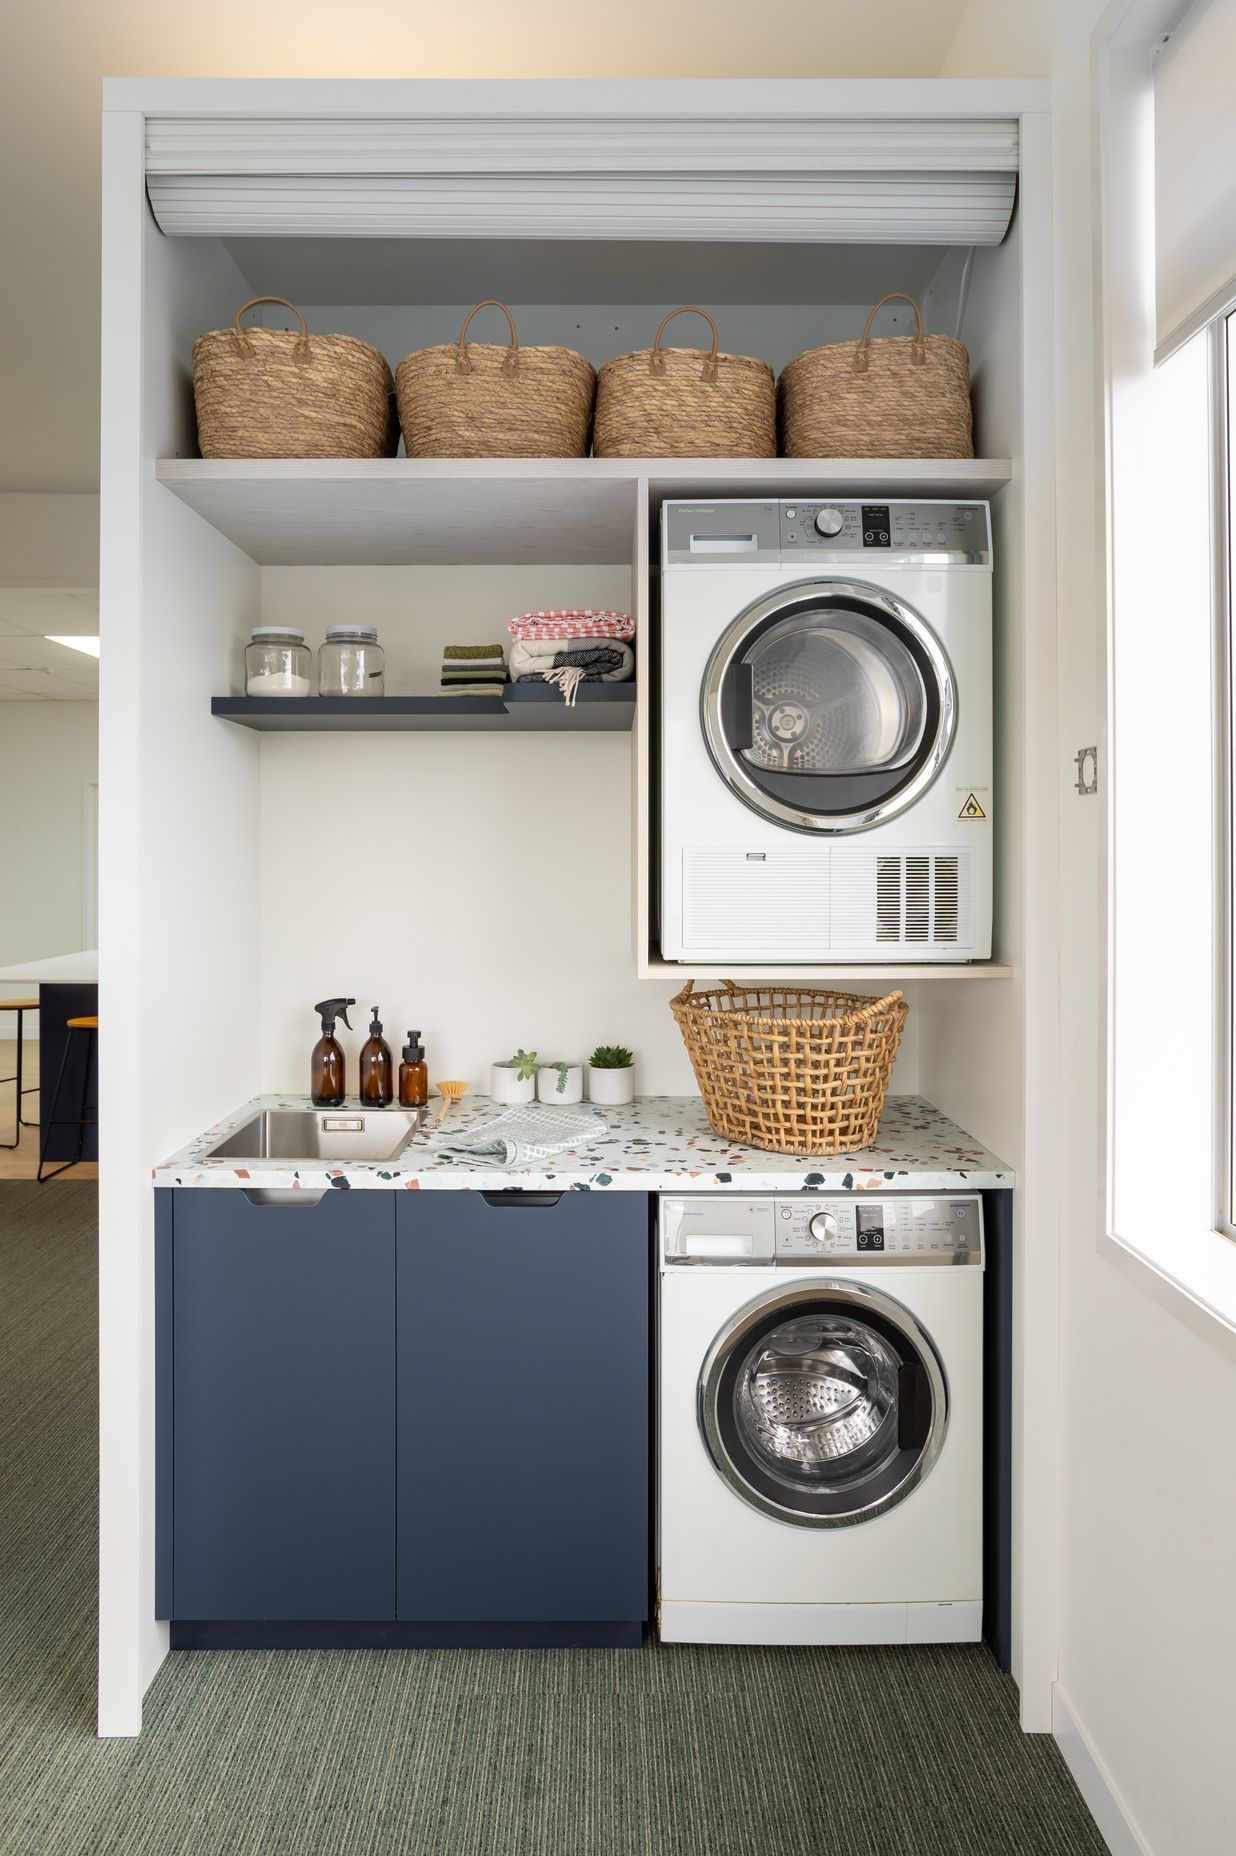 Roller doors are the perfect solution for a laundry cupboard.